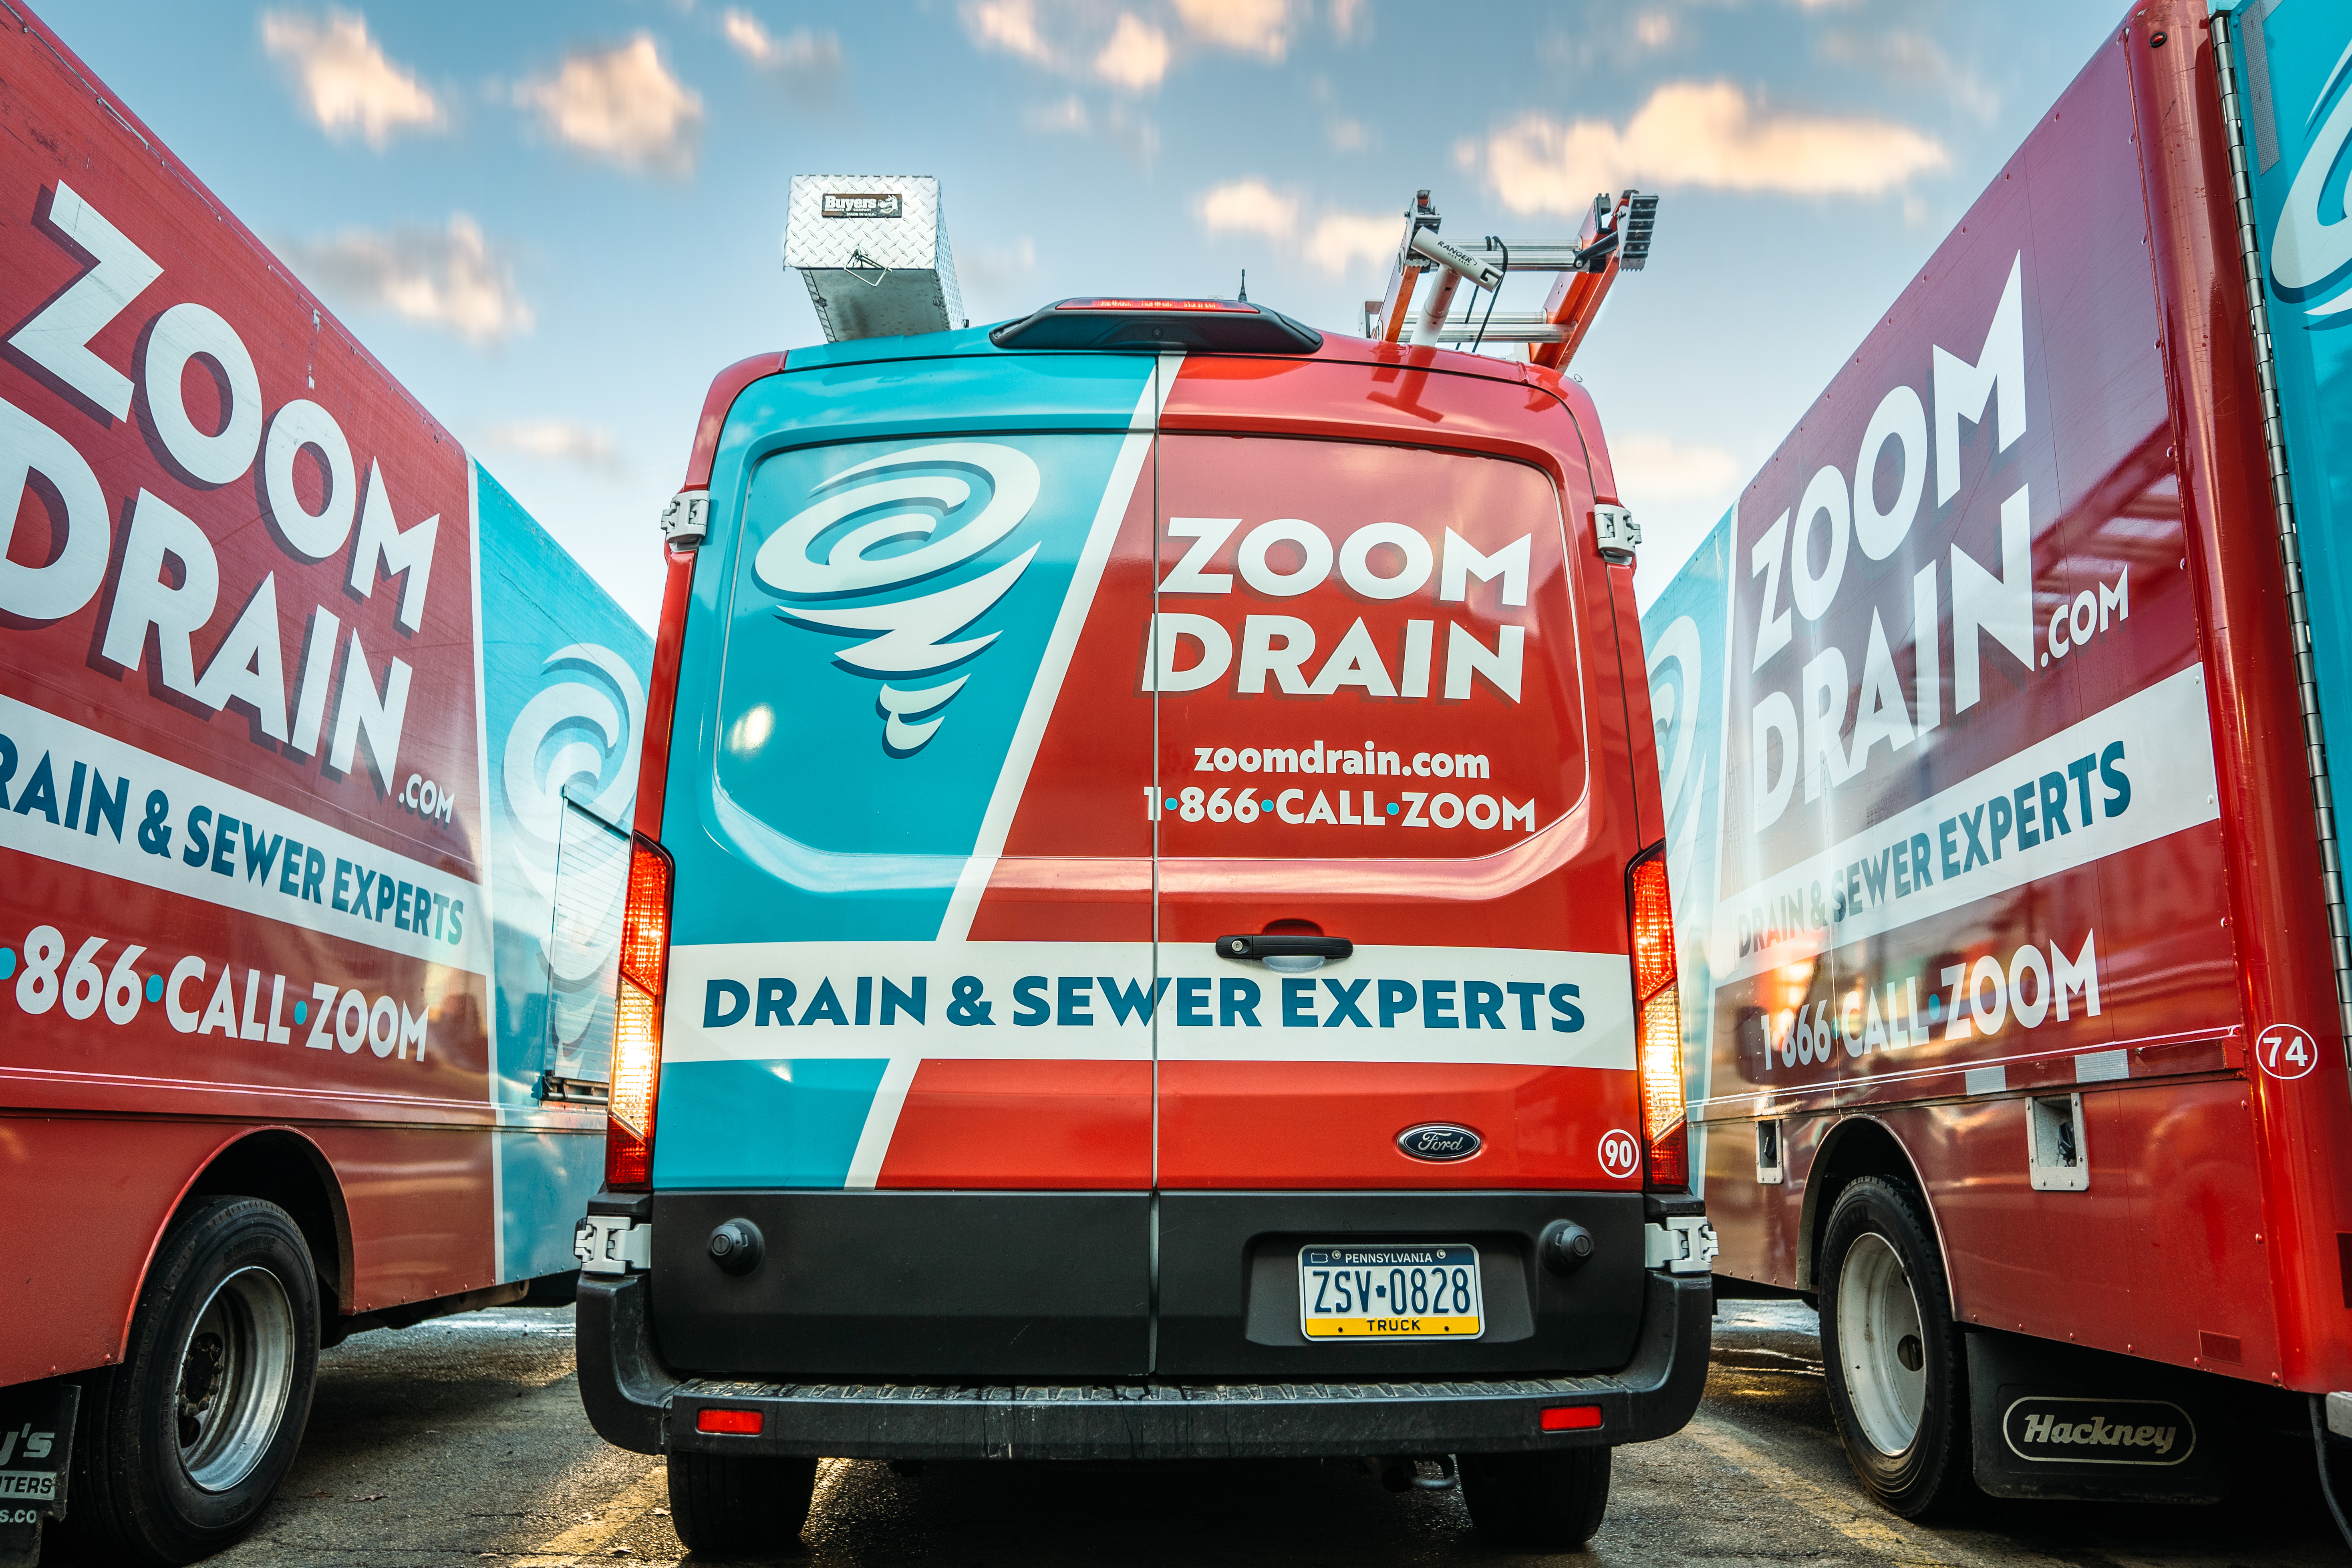 Now Open: Get To Know The Owners Of Zoom Drain Kansas City